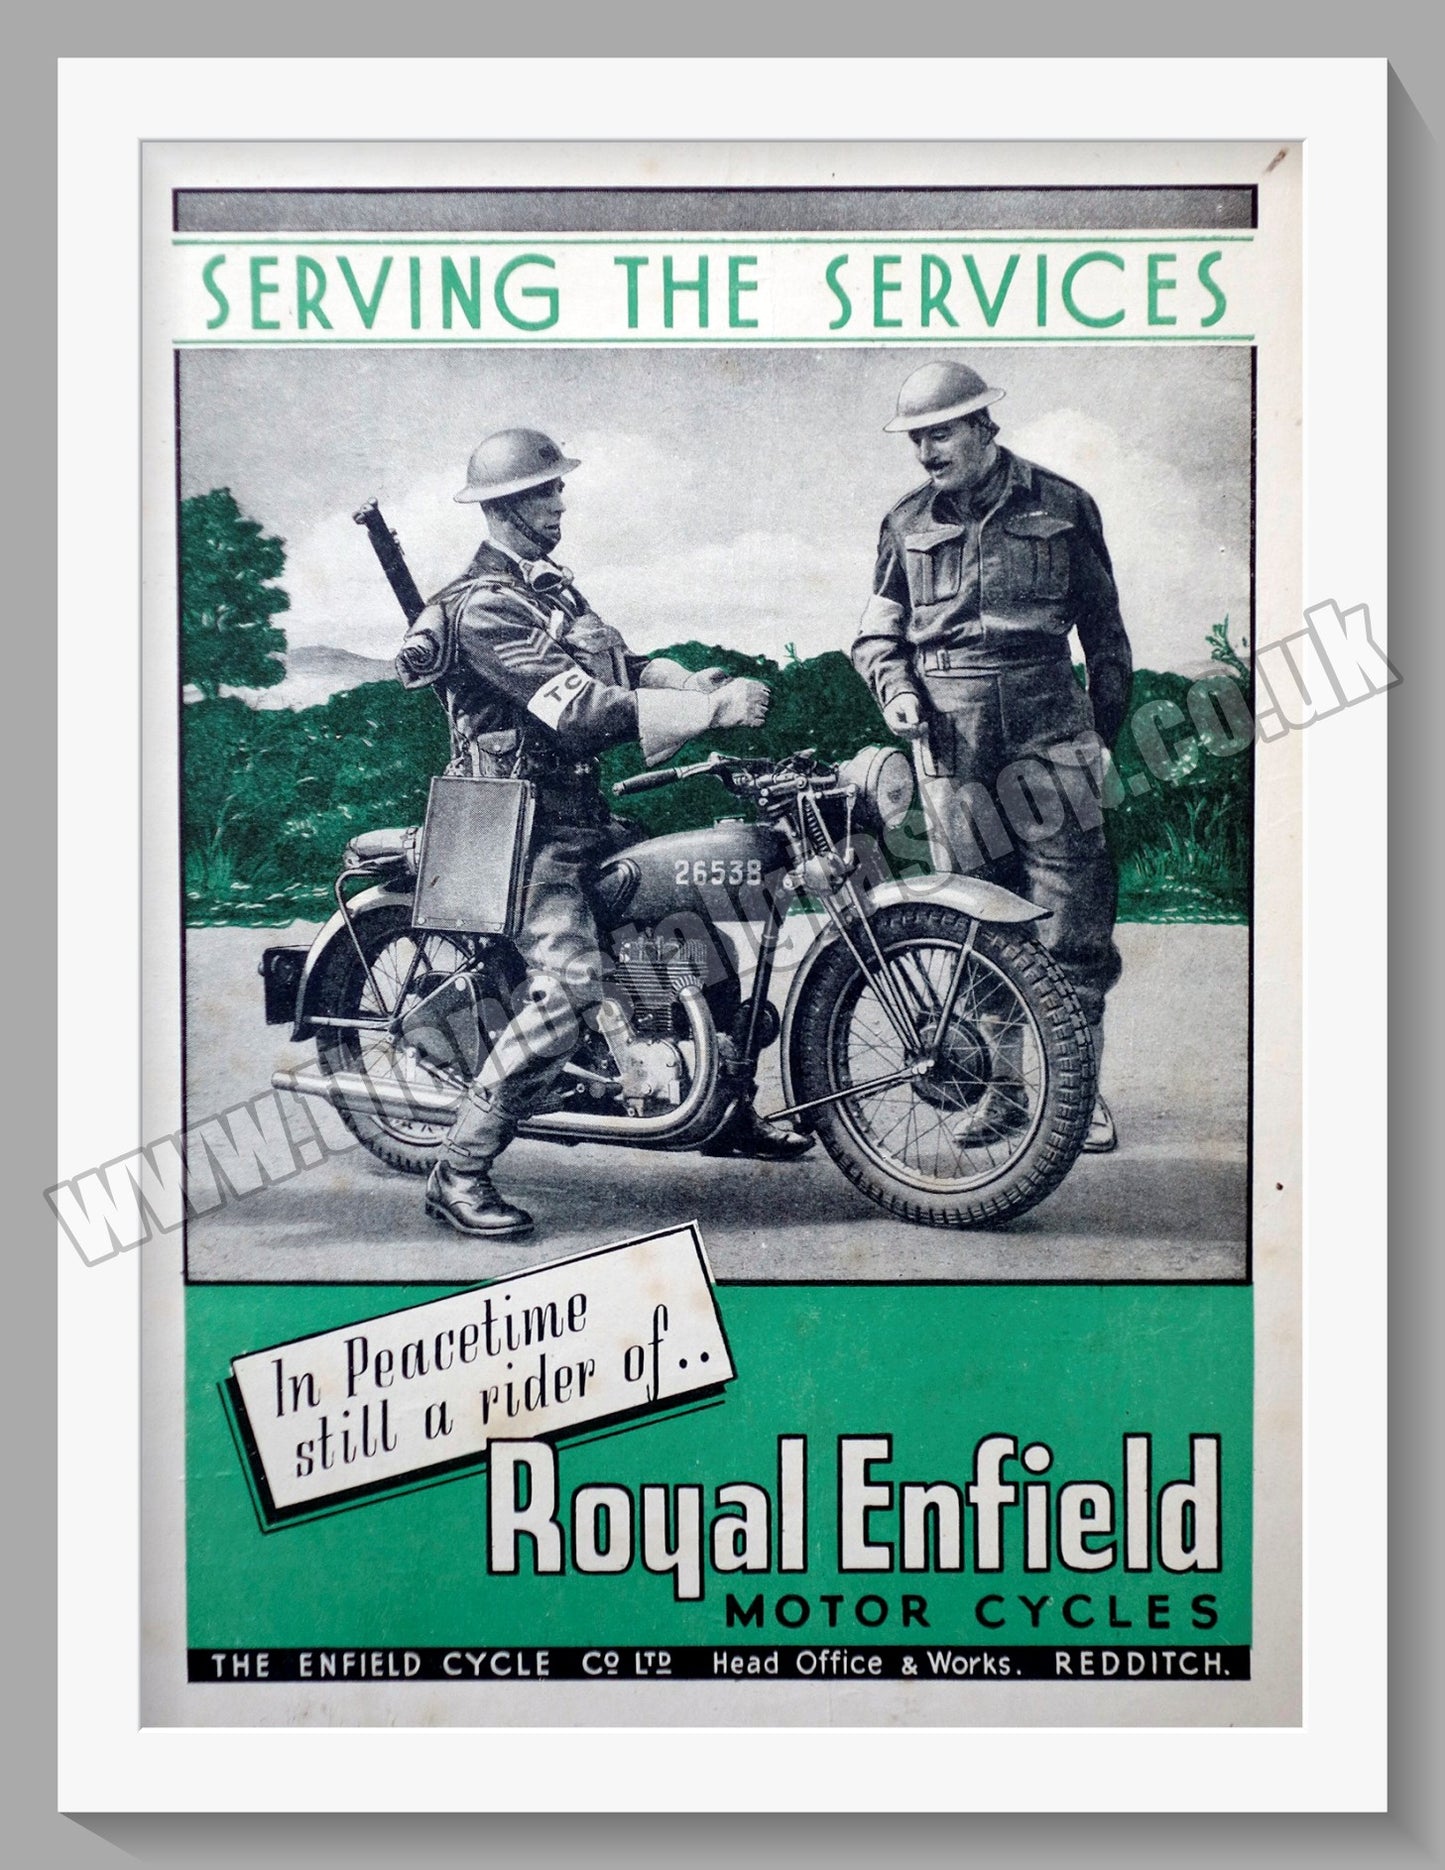 Royal Enfield Motorcycles. Serving The Services. Original Advert 1943 (ref AD57077)